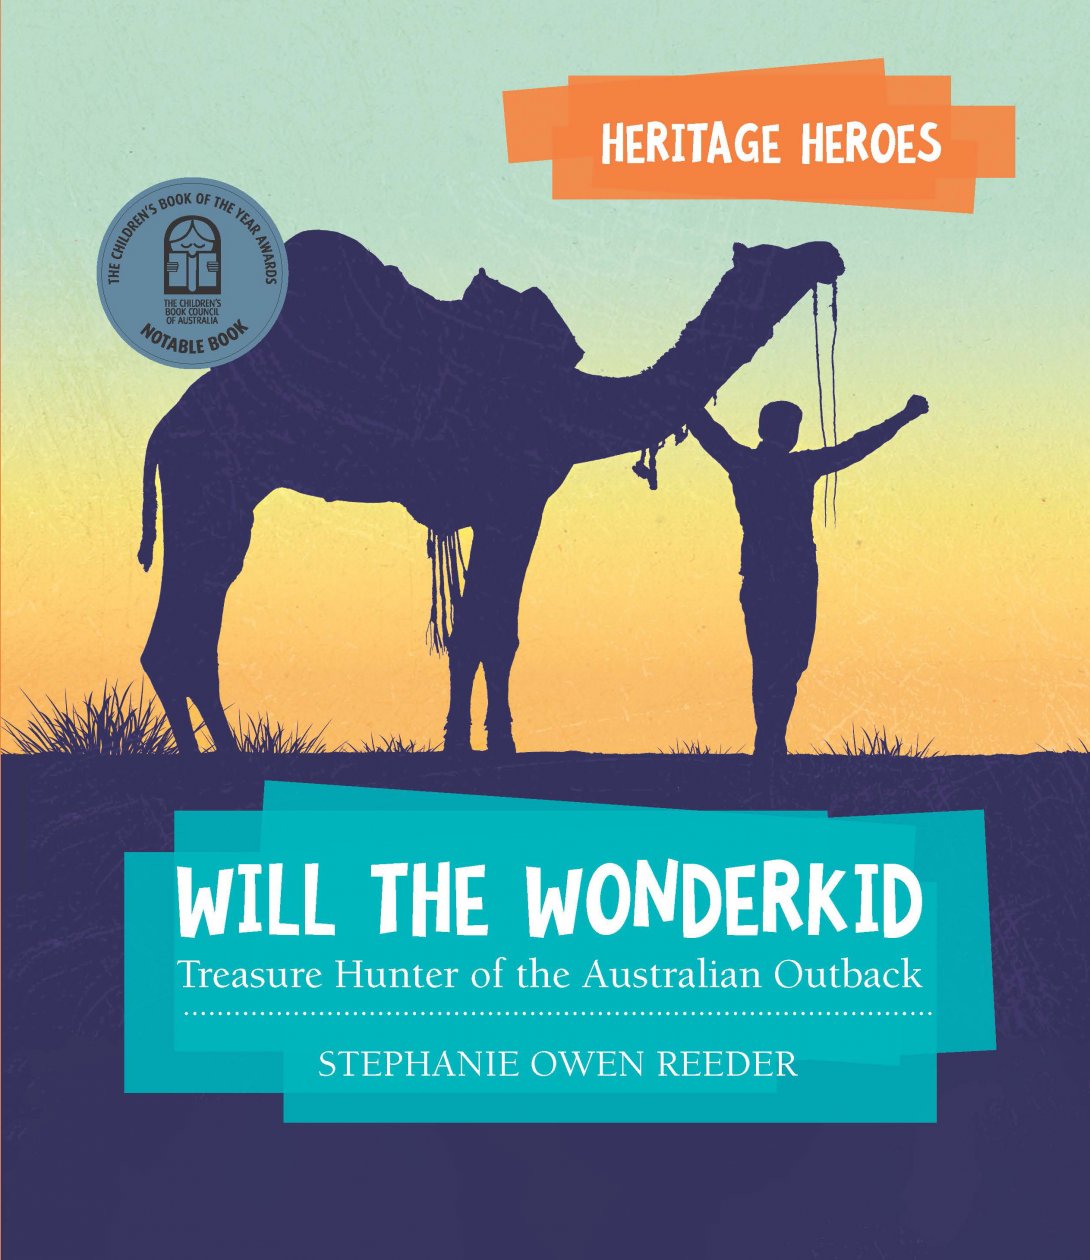 Cover of a book shows sillhouette of a boy and a camel; title reads 'Will the Wonderkid'